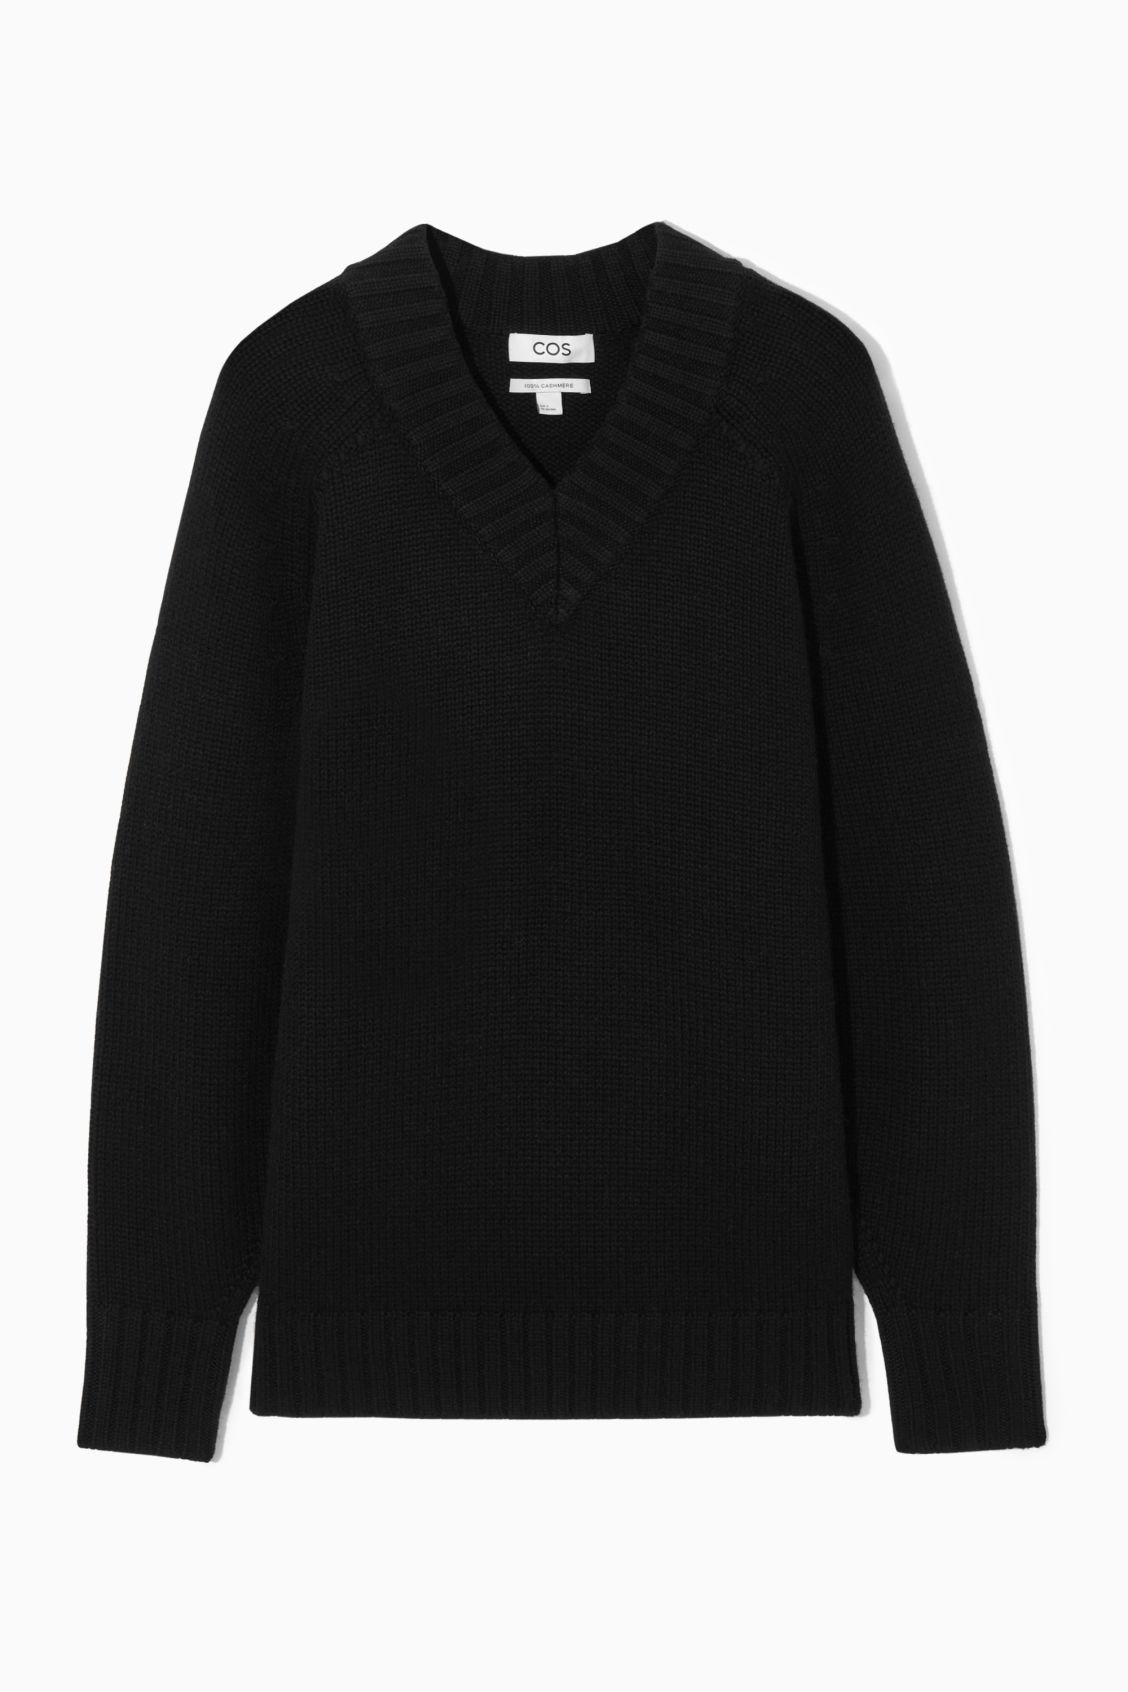 COS Chunky Pure Cashmere V-neck Jumper in Black | Lyst